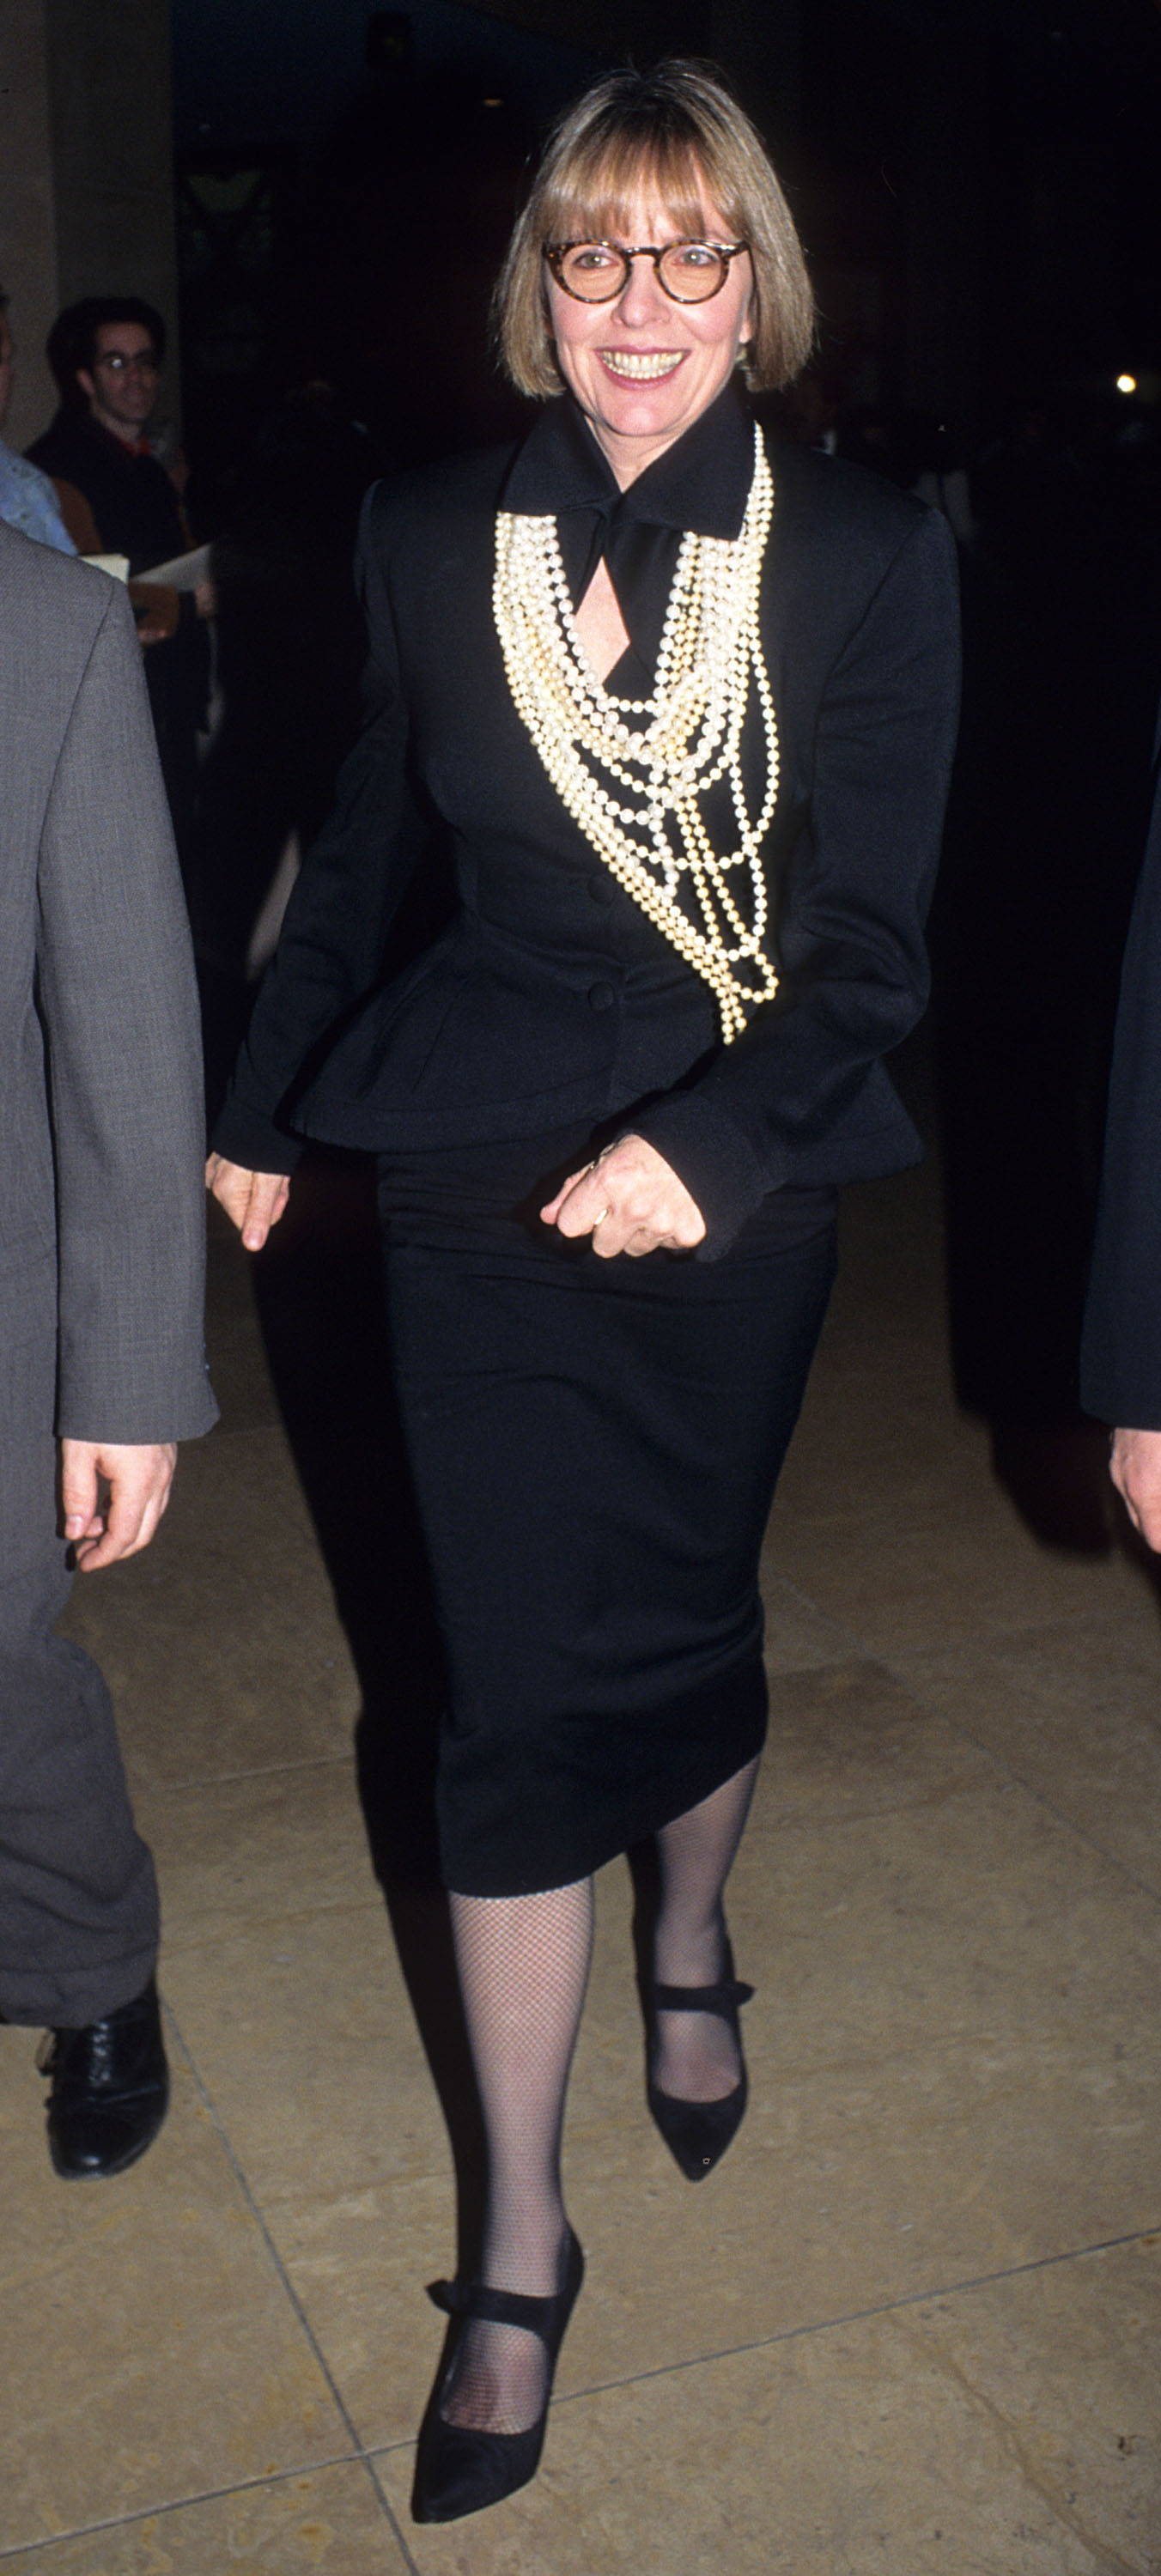 Diane Keaton attends the 52nd Annual Golden Globe Awards in 1995 | Source: Getty Images